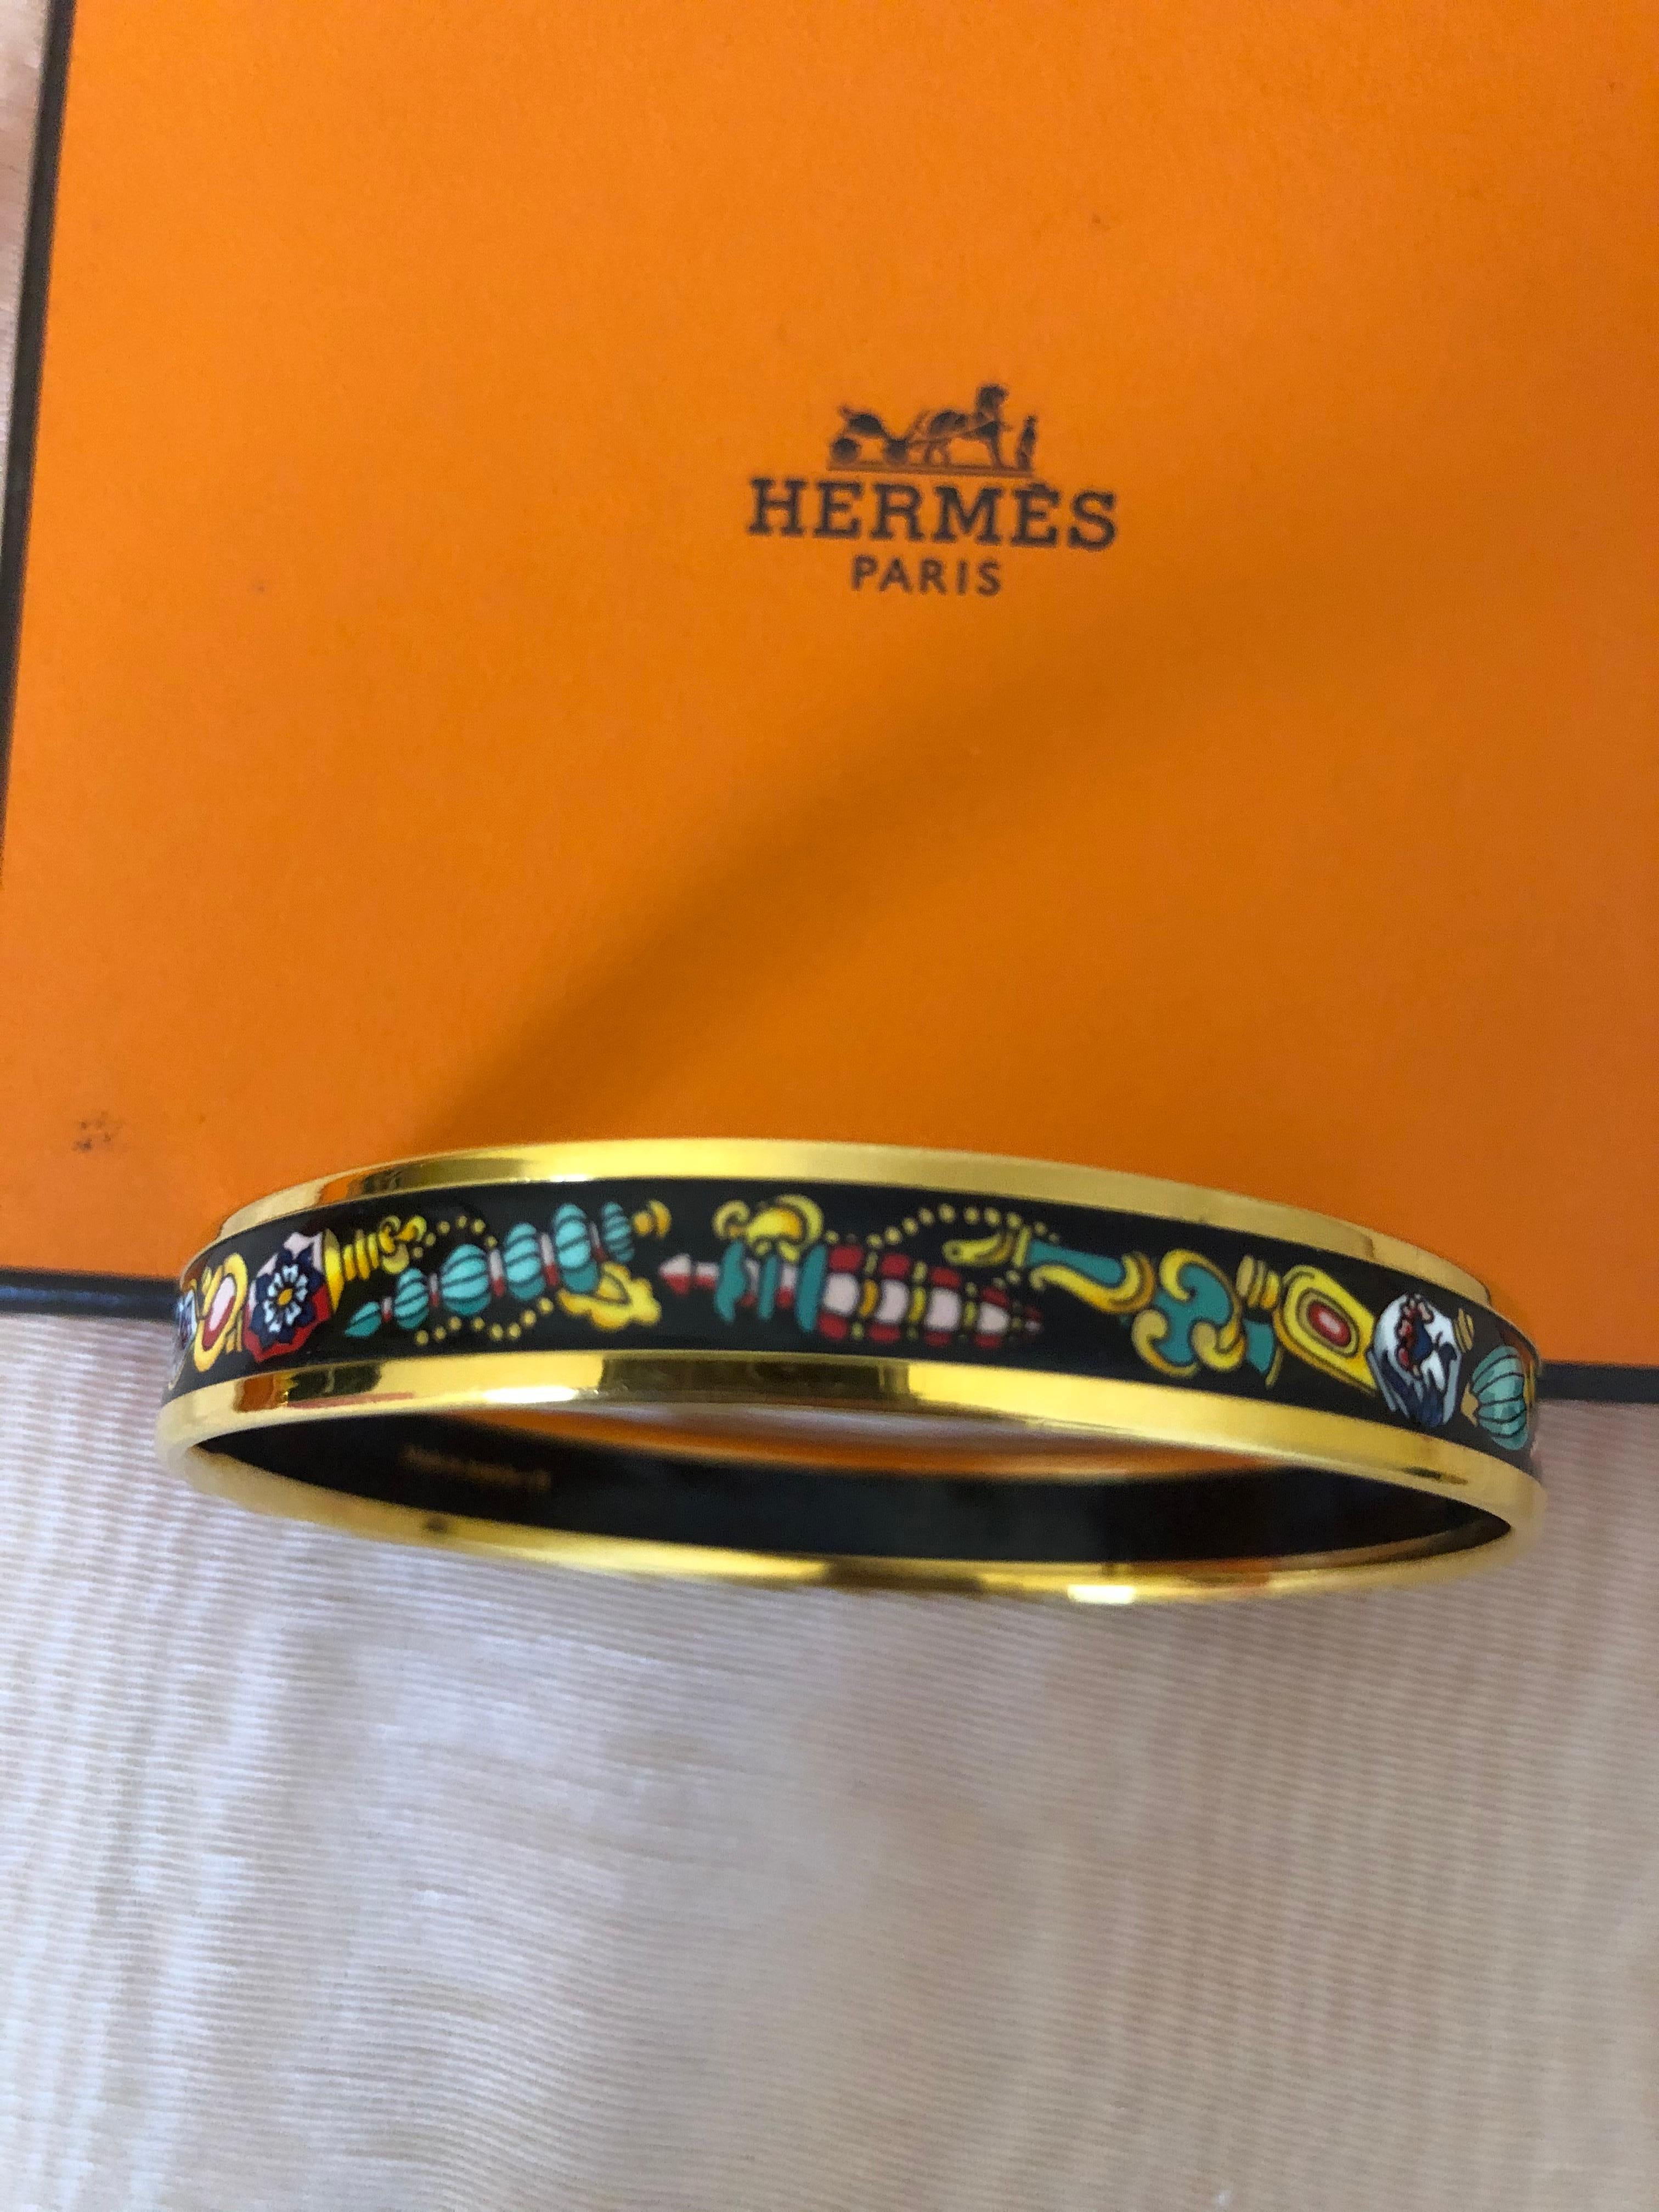 Lovely Hermes bangle depicting vintage perfume bottles in Palladium and enamel. This bracelet is in excellent condition and includes the box.